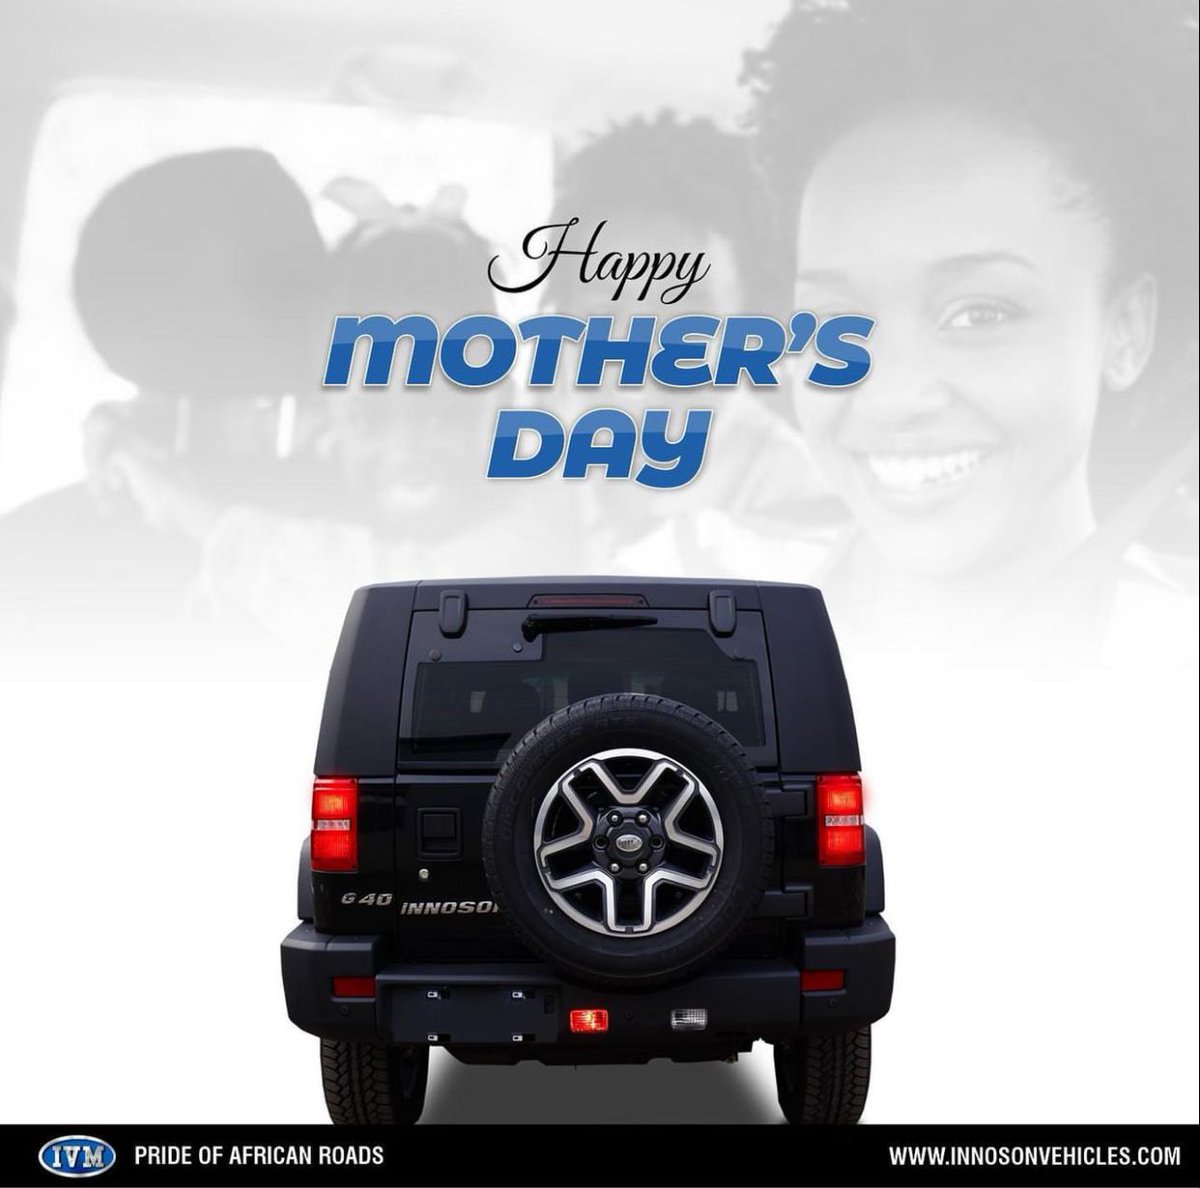 Today, we honour the driving force behind our lives: our incredible mothers! They steer our lives with love and care, making life's journey sweeter. Wishing all amazing moms a Happy Mother's Day from IVM!